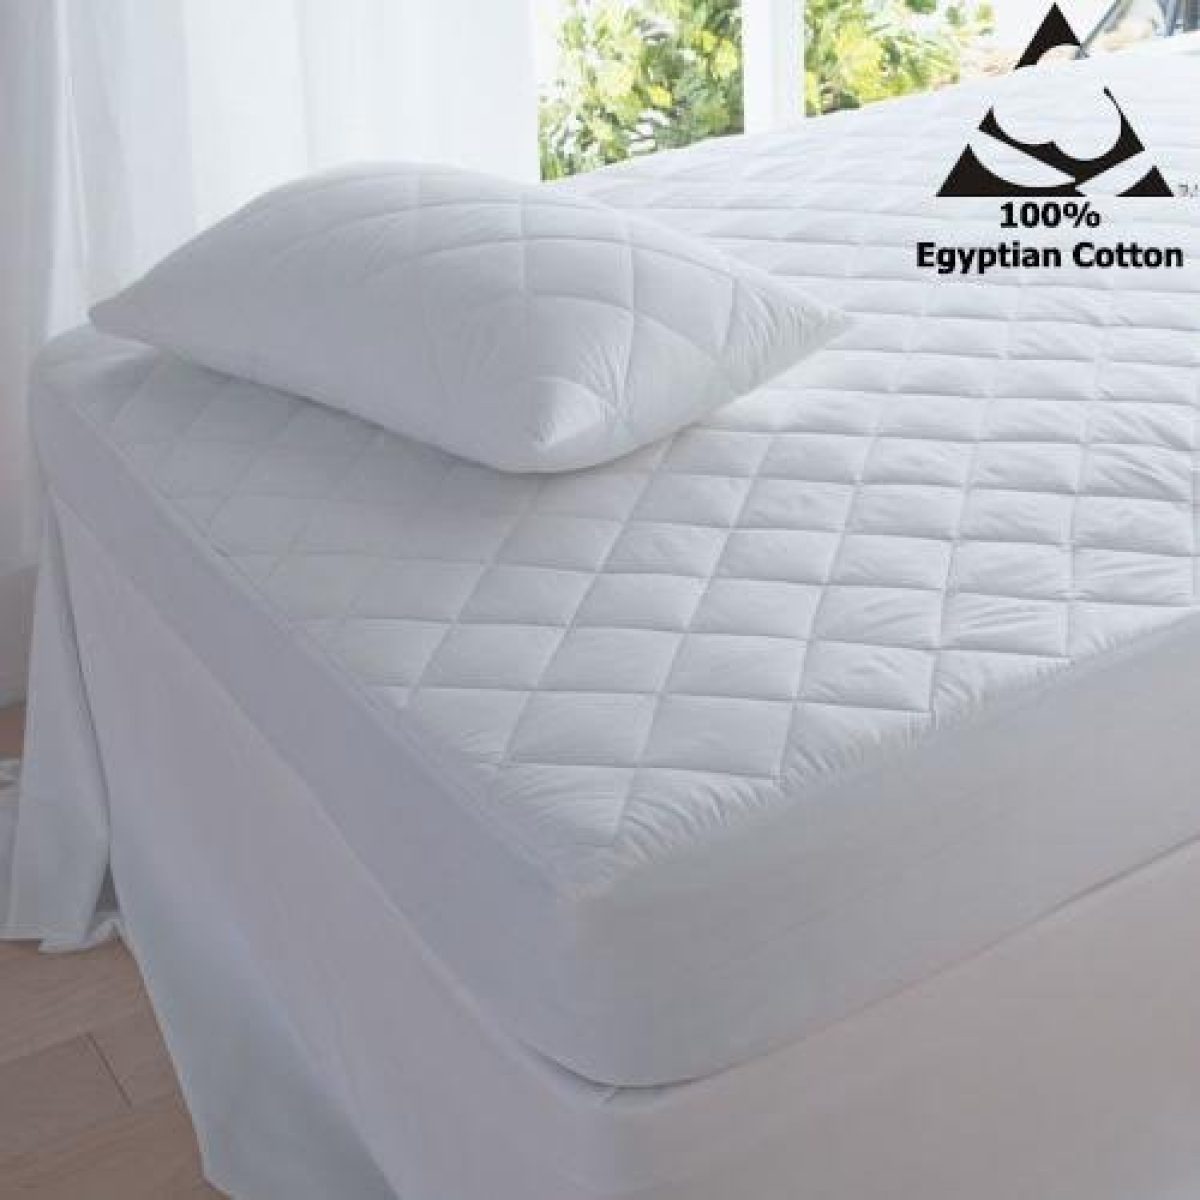 EXTRA DEEP 12 INCH 30 CM MICROFIBER QUILTED MATTRESS PROTECTOR FITTED COVER 